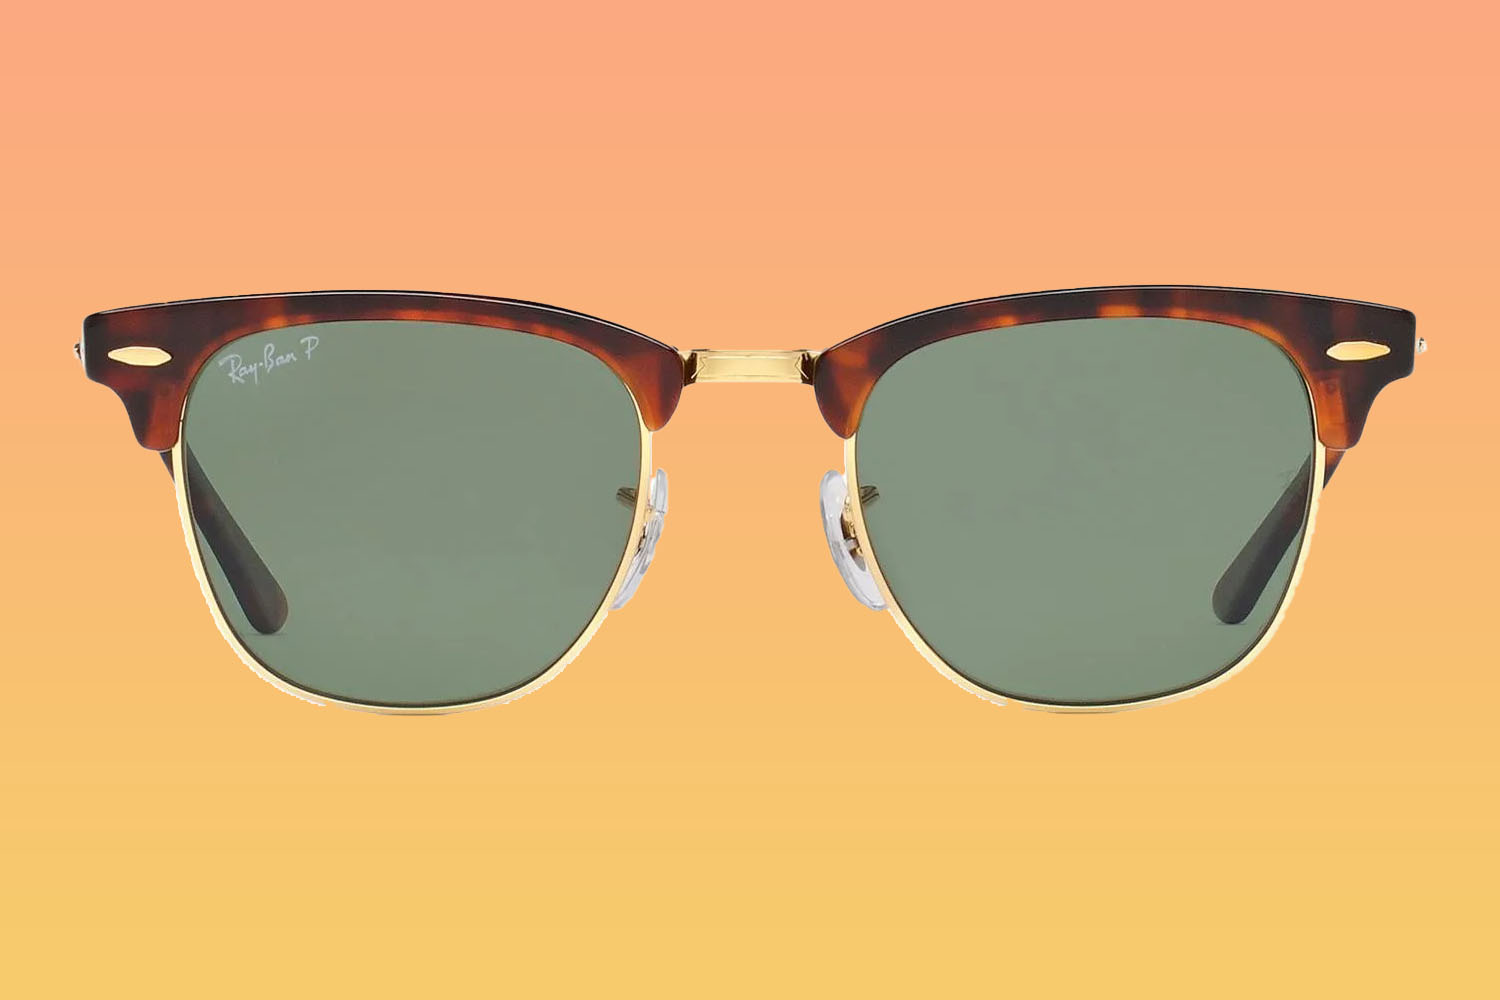 A pair of Ray-Ban sunglasses on a orange-to-yellow gradient background 